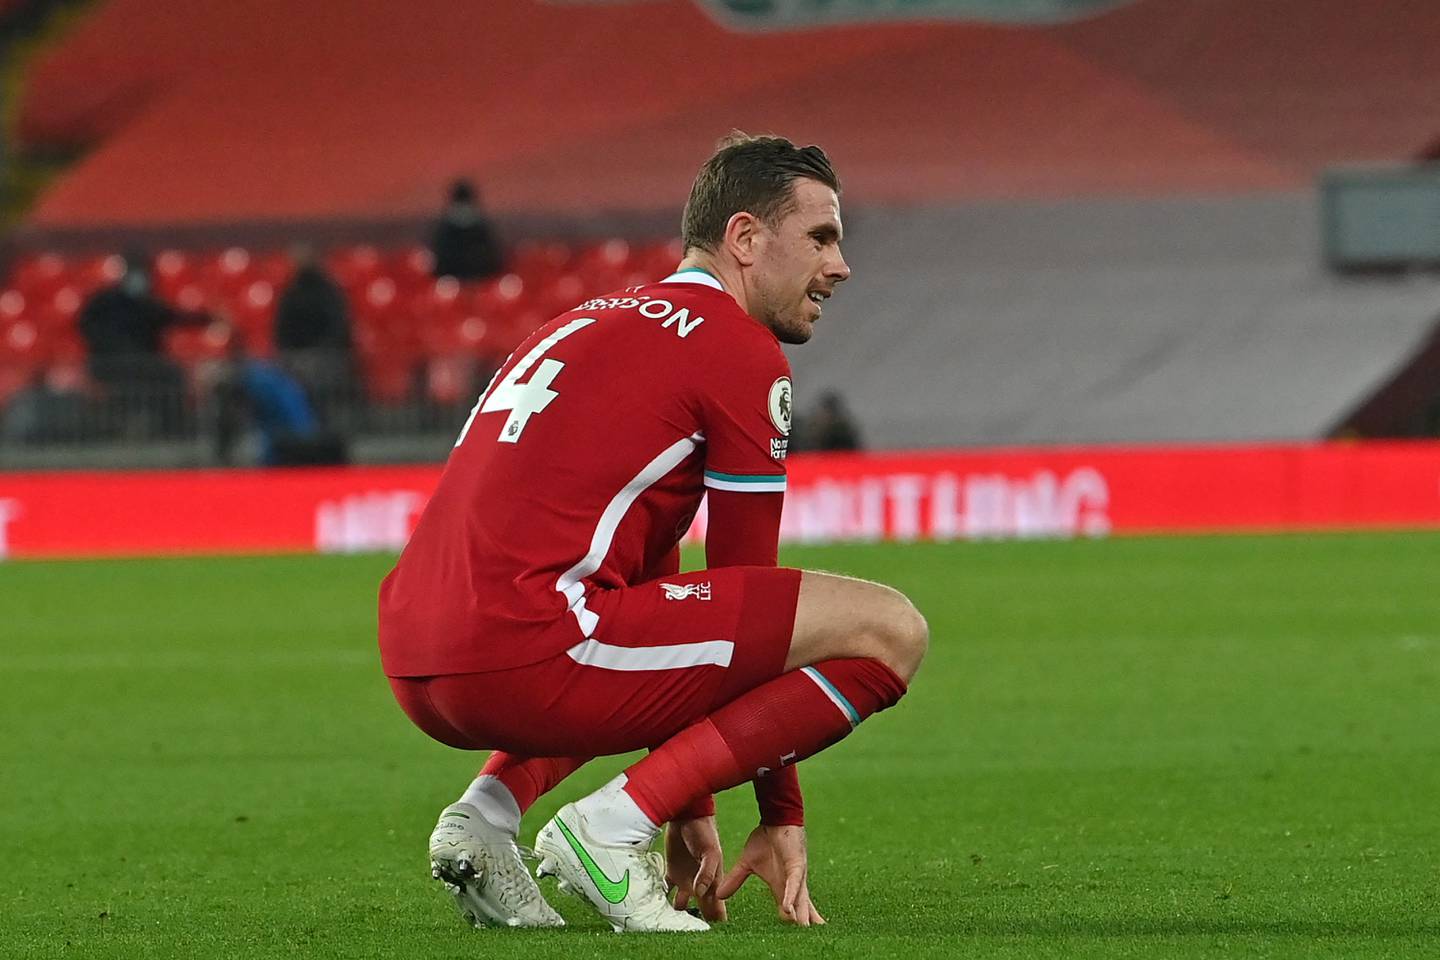 Liverpool's English midfielder Jordan Henderson reacts after picking up an injury during the English Premier League football match between Liverpool and Everton at Anfield in Liverpool, north west England on February 20, 2021. (Photo by Paul ELLIS / POOL / AFP) / RESTRICTED TO EDITORIAL USE. No use with unauthorized audio, video, data, fixture lists, club/league logos or 'live' services. Online in-match use limited to 120 images. An additional 40 images may be used in extra time. No video emulation. Social media in-match use limited to 120 images. An additional 40 images may be used in extra time. No use in betting publications, games or single club/league/player publications. /